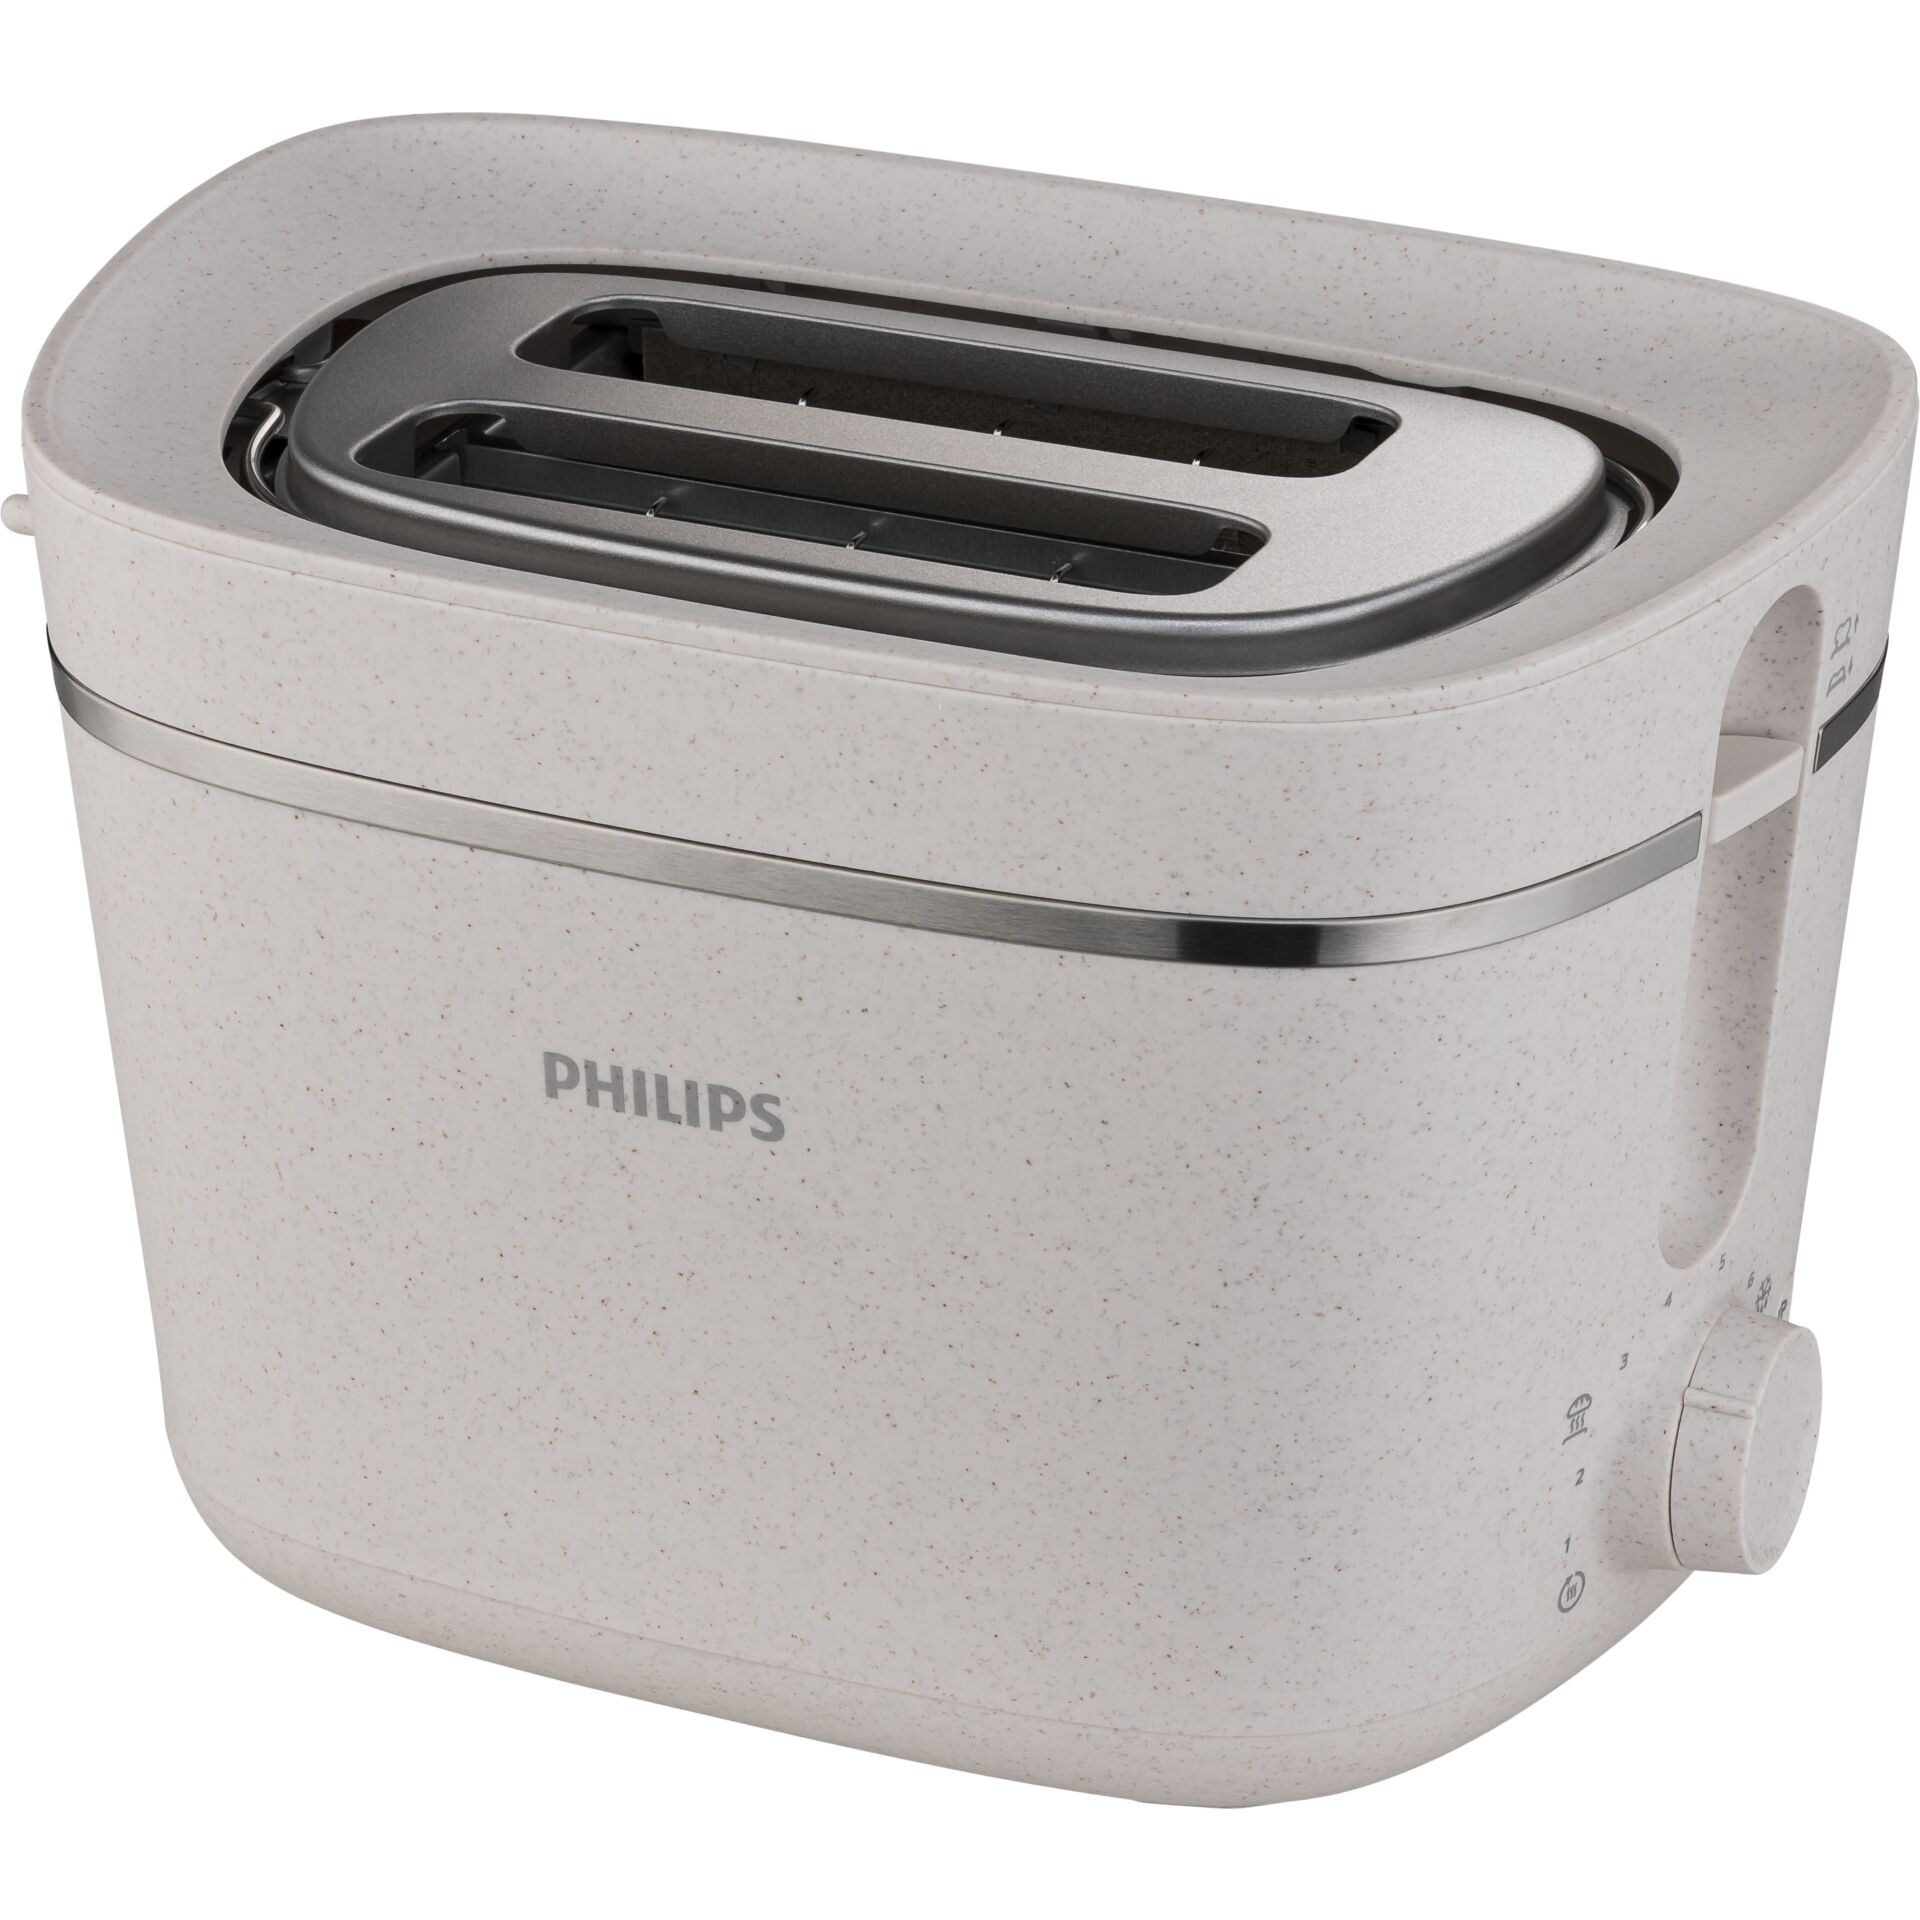 Philips Eco Conscious Edition HD2640/10 Toaster 5000er Serie